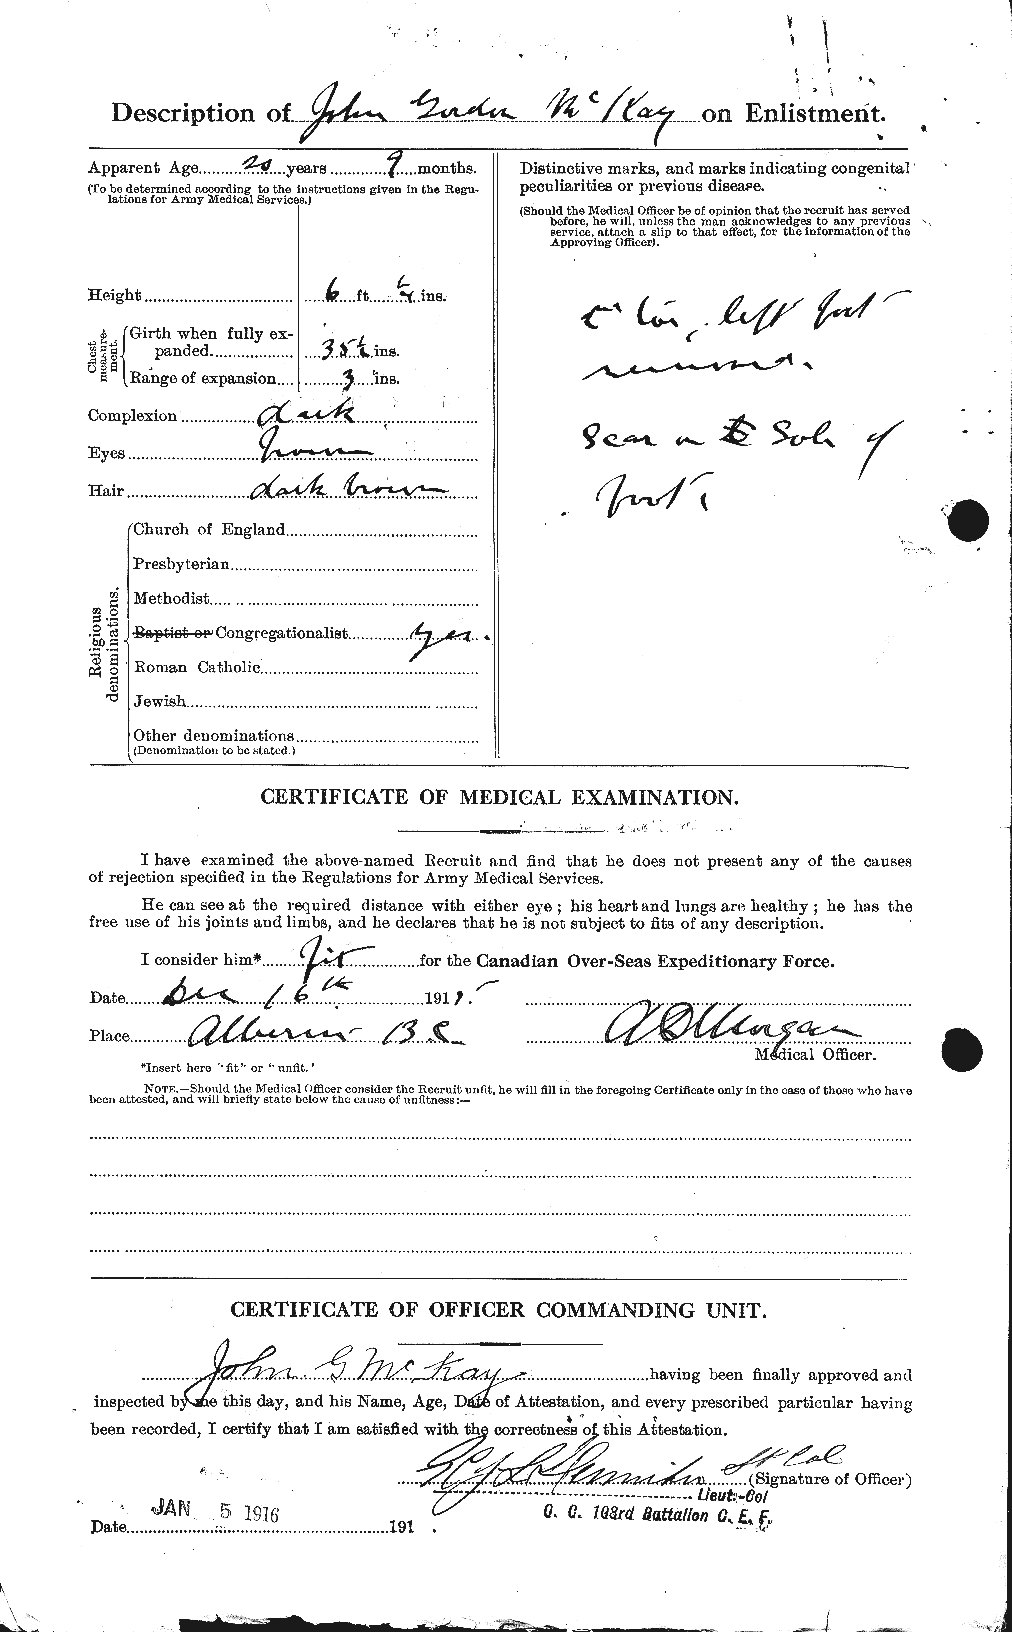 Personnel Records of the First World War - CEF 527060b